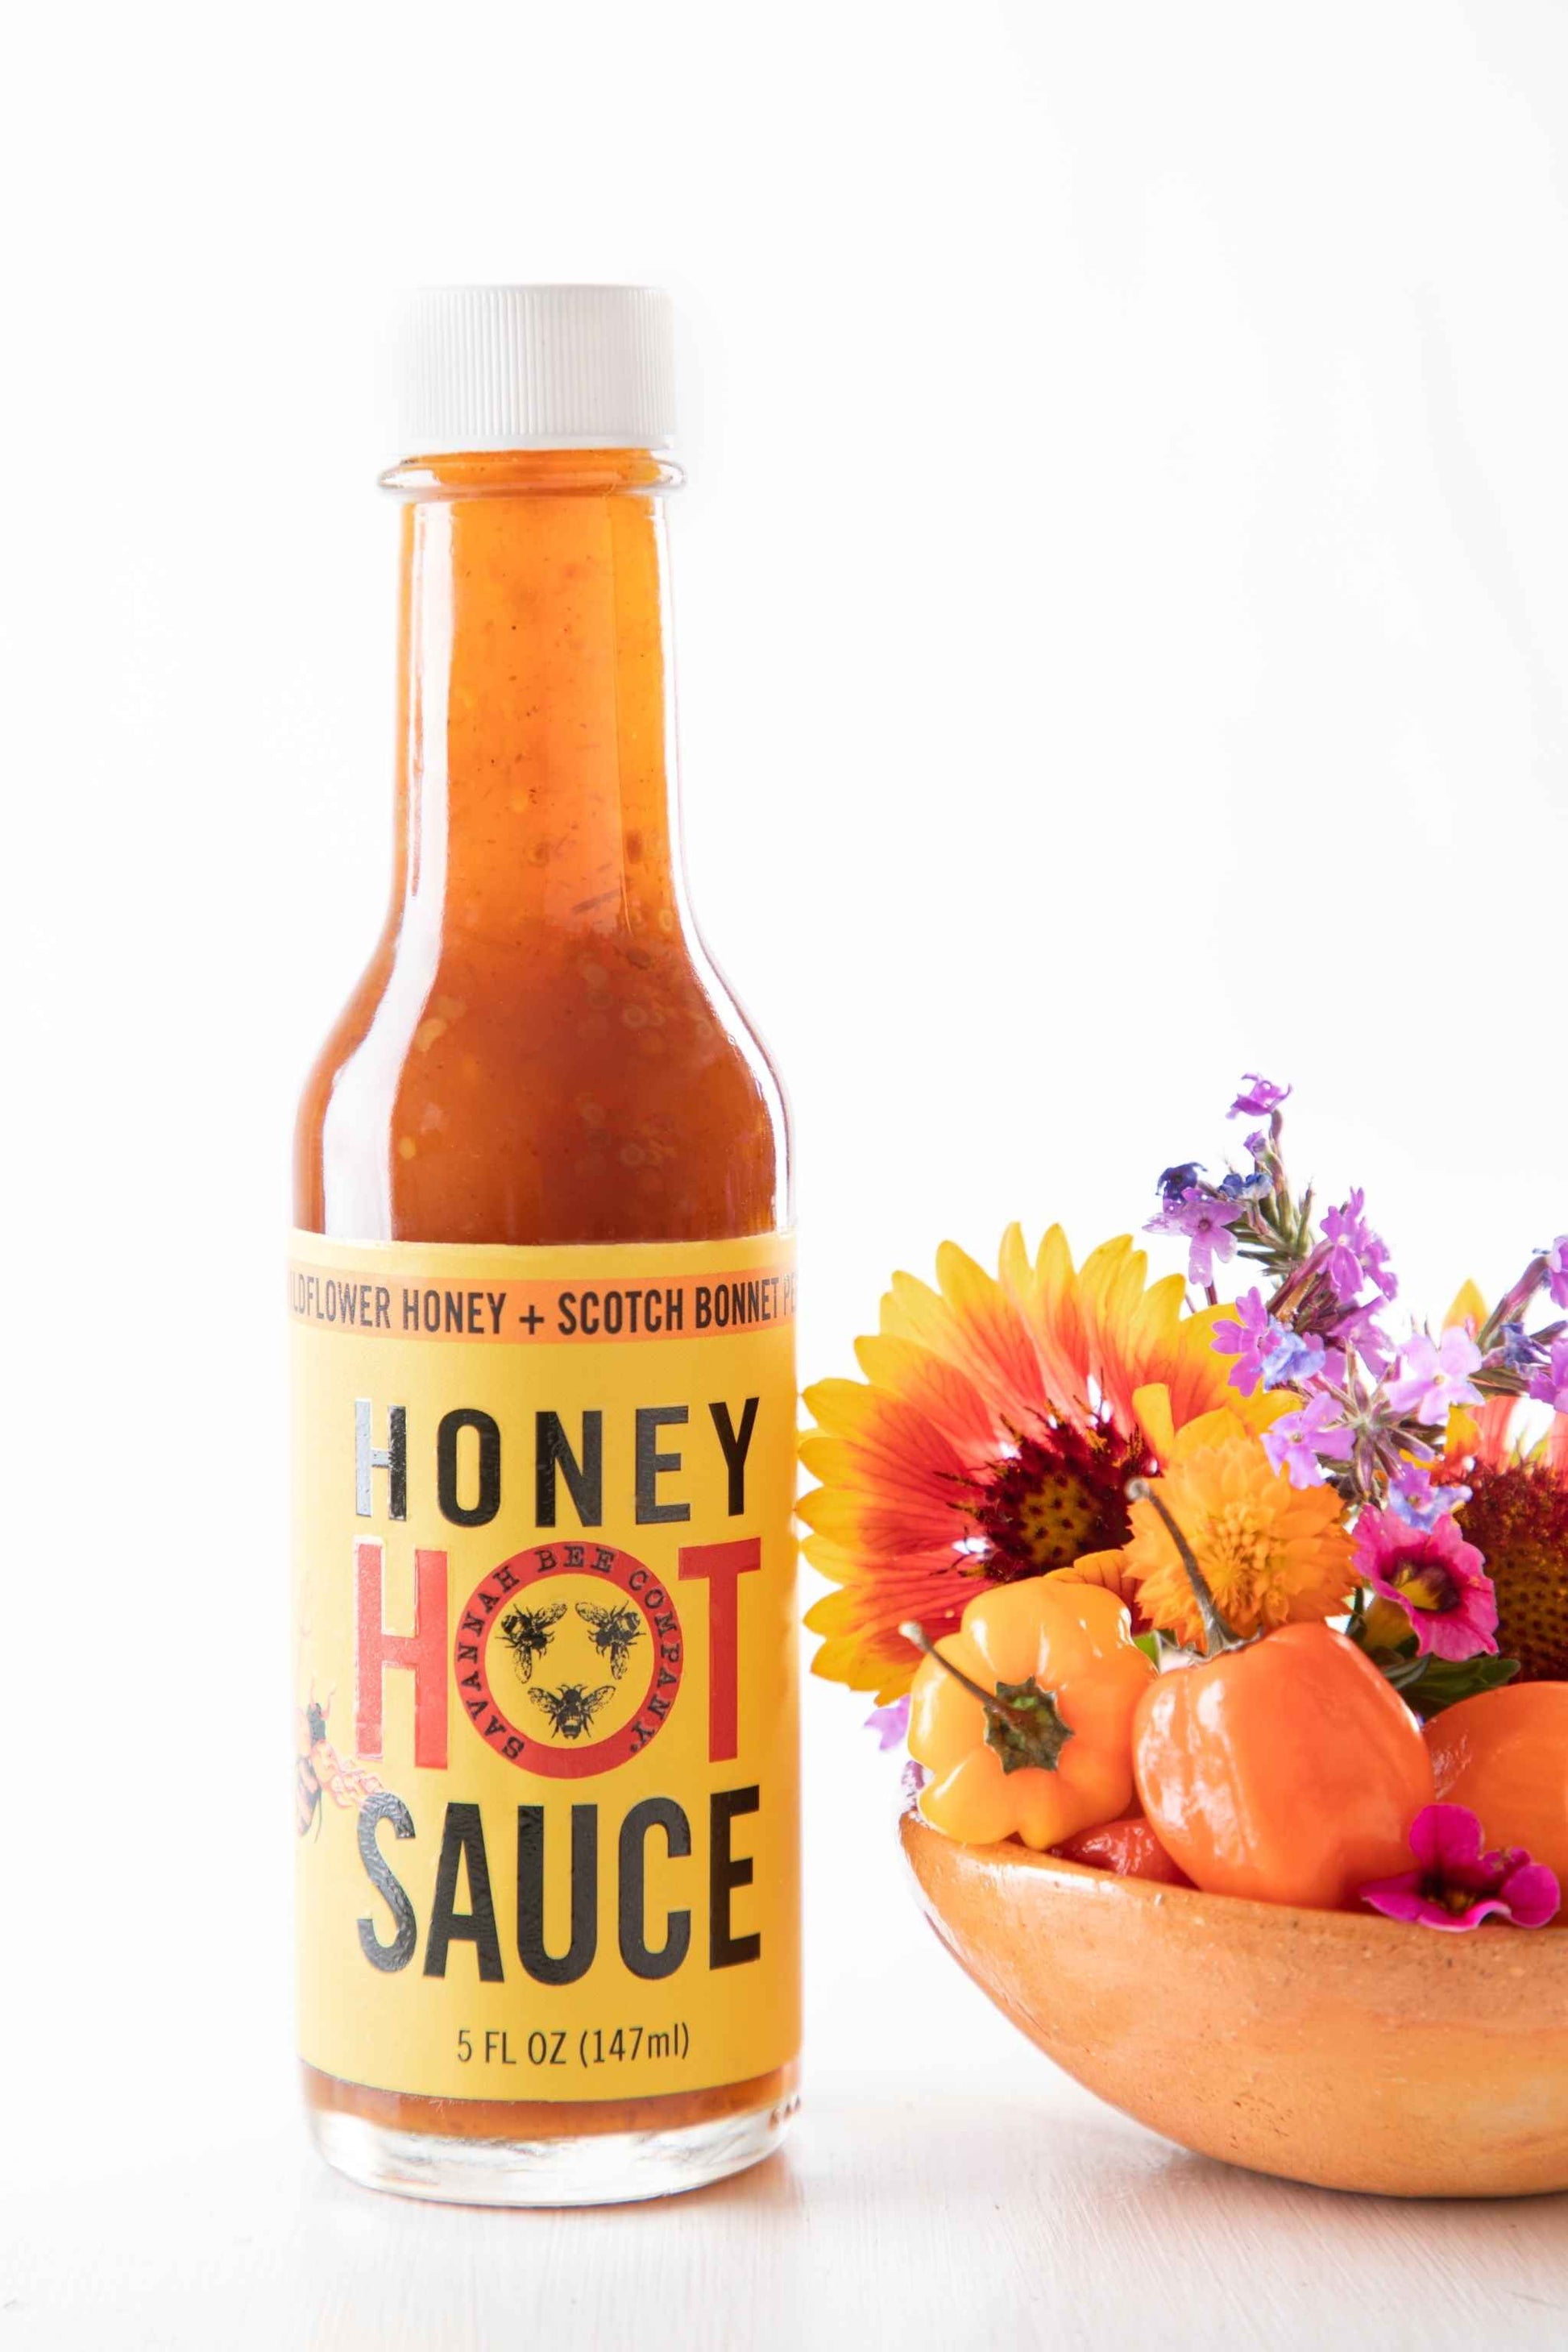 Some Like It Hot: Spicy Snacks and Hot Sauce on the Rise - The